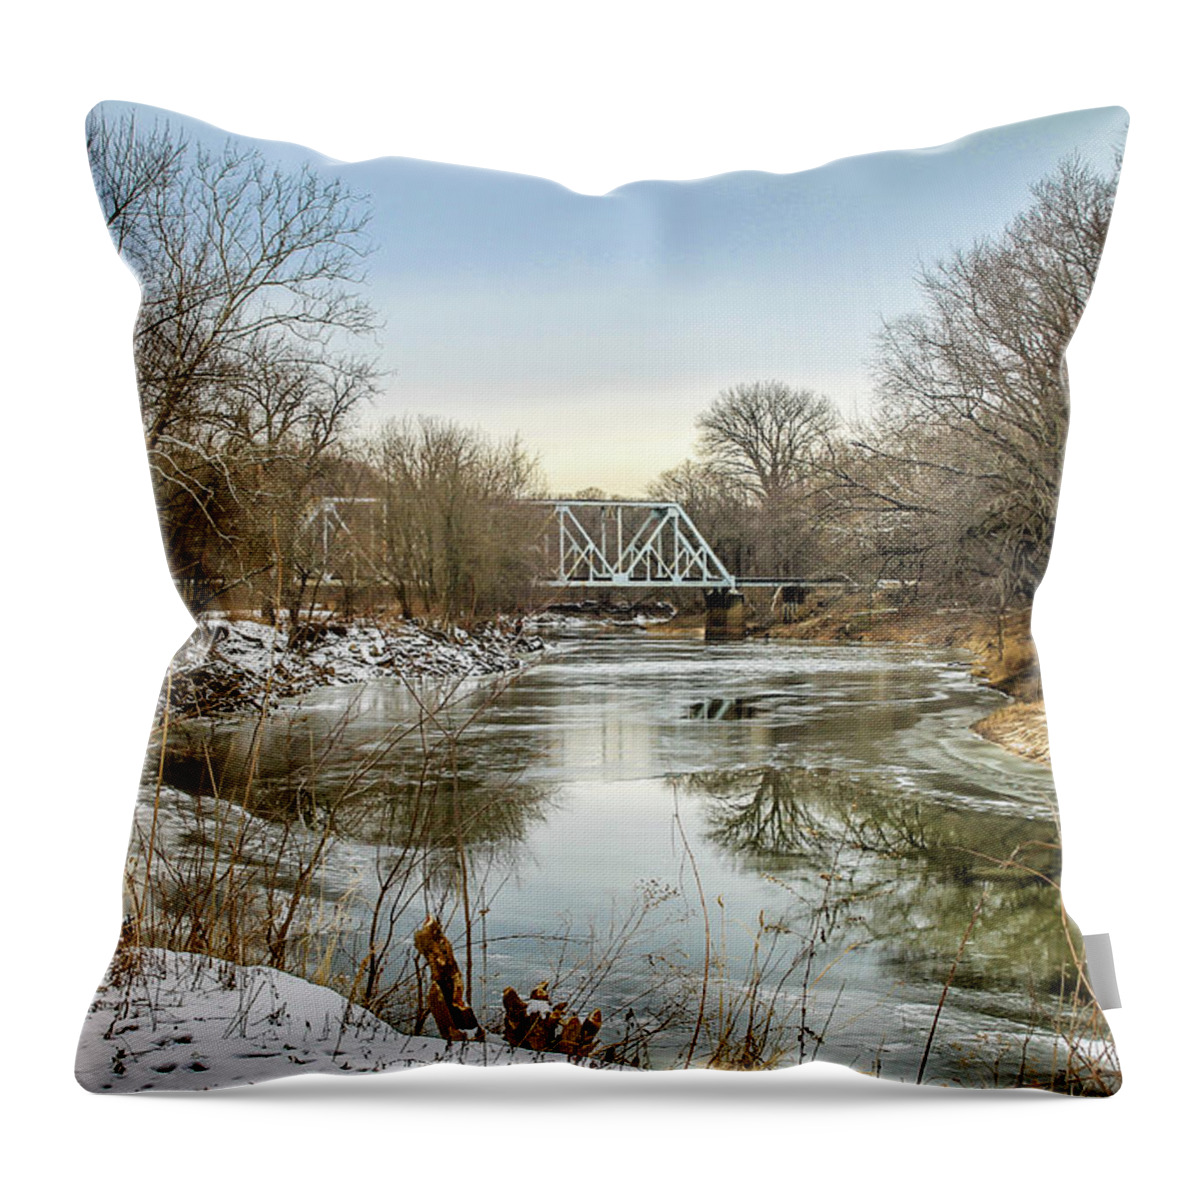  Throw Pillow featuring the photograph Winter Day by Tony HUTSON